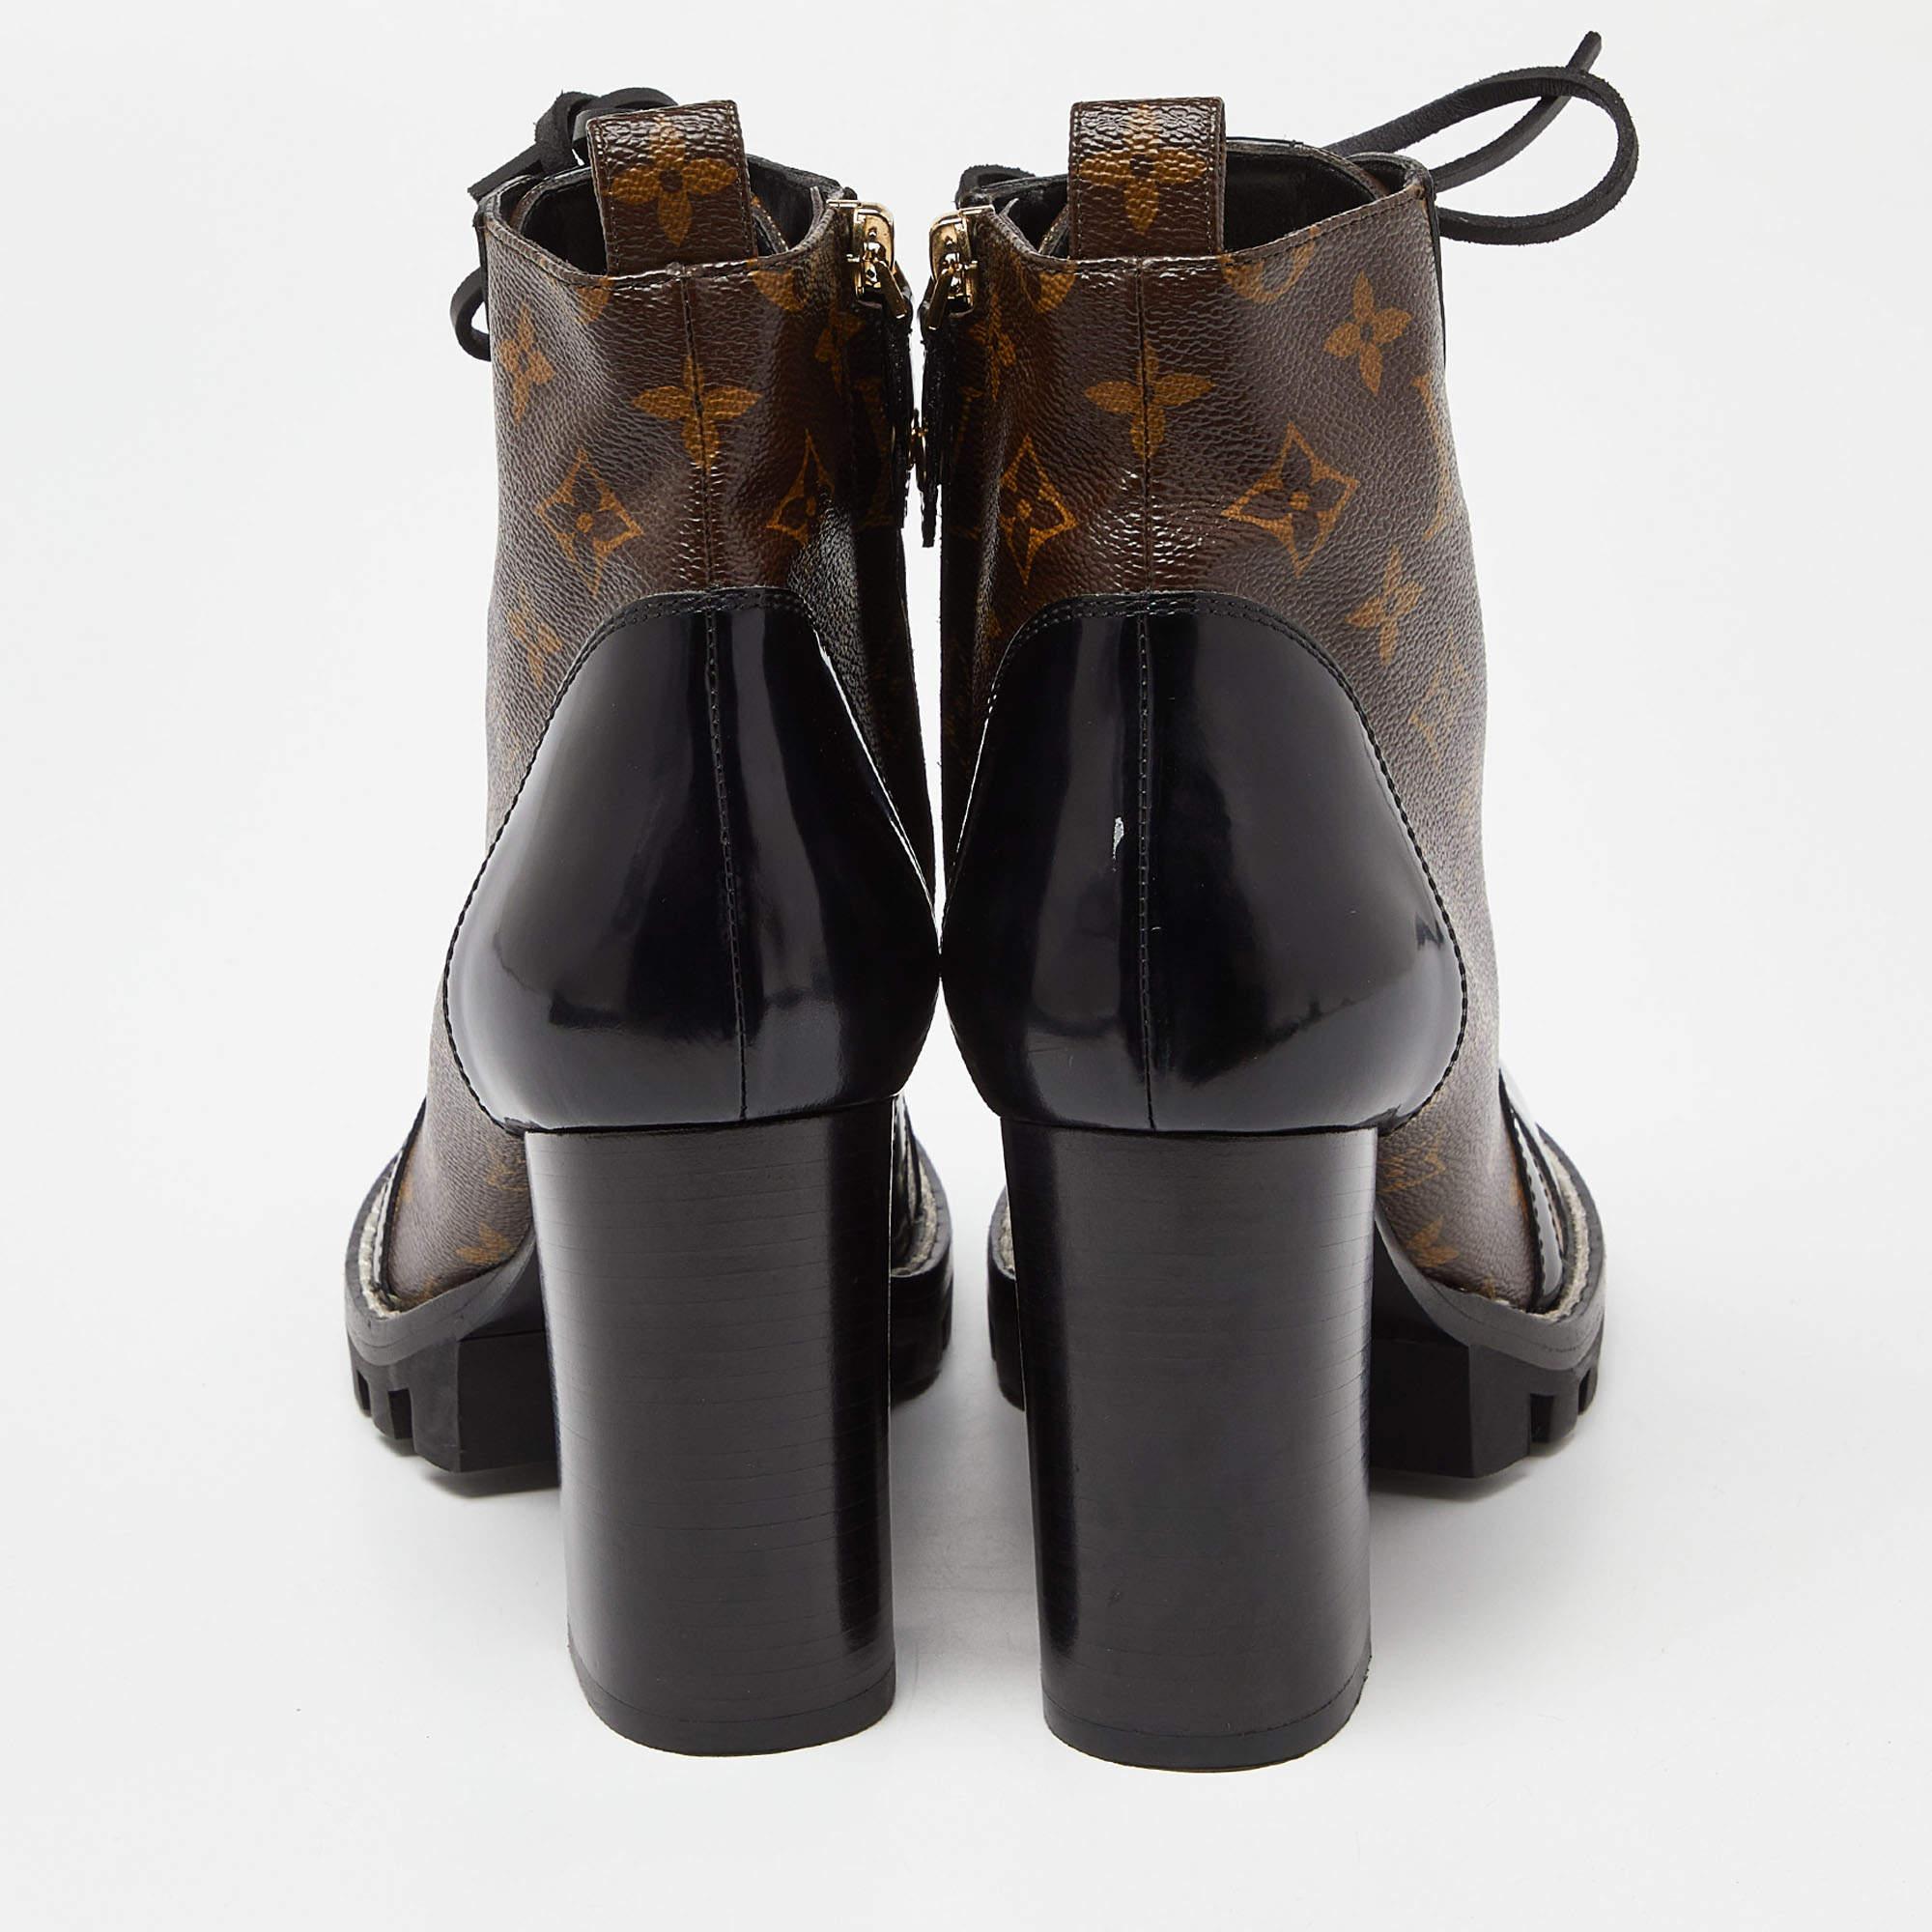 Louis Vuitton Monogram Canvas And Patent Leather Star Trail Ankle Boot Size 40 In Excellent Condition For Sale In Dubai, Al Qouz 2